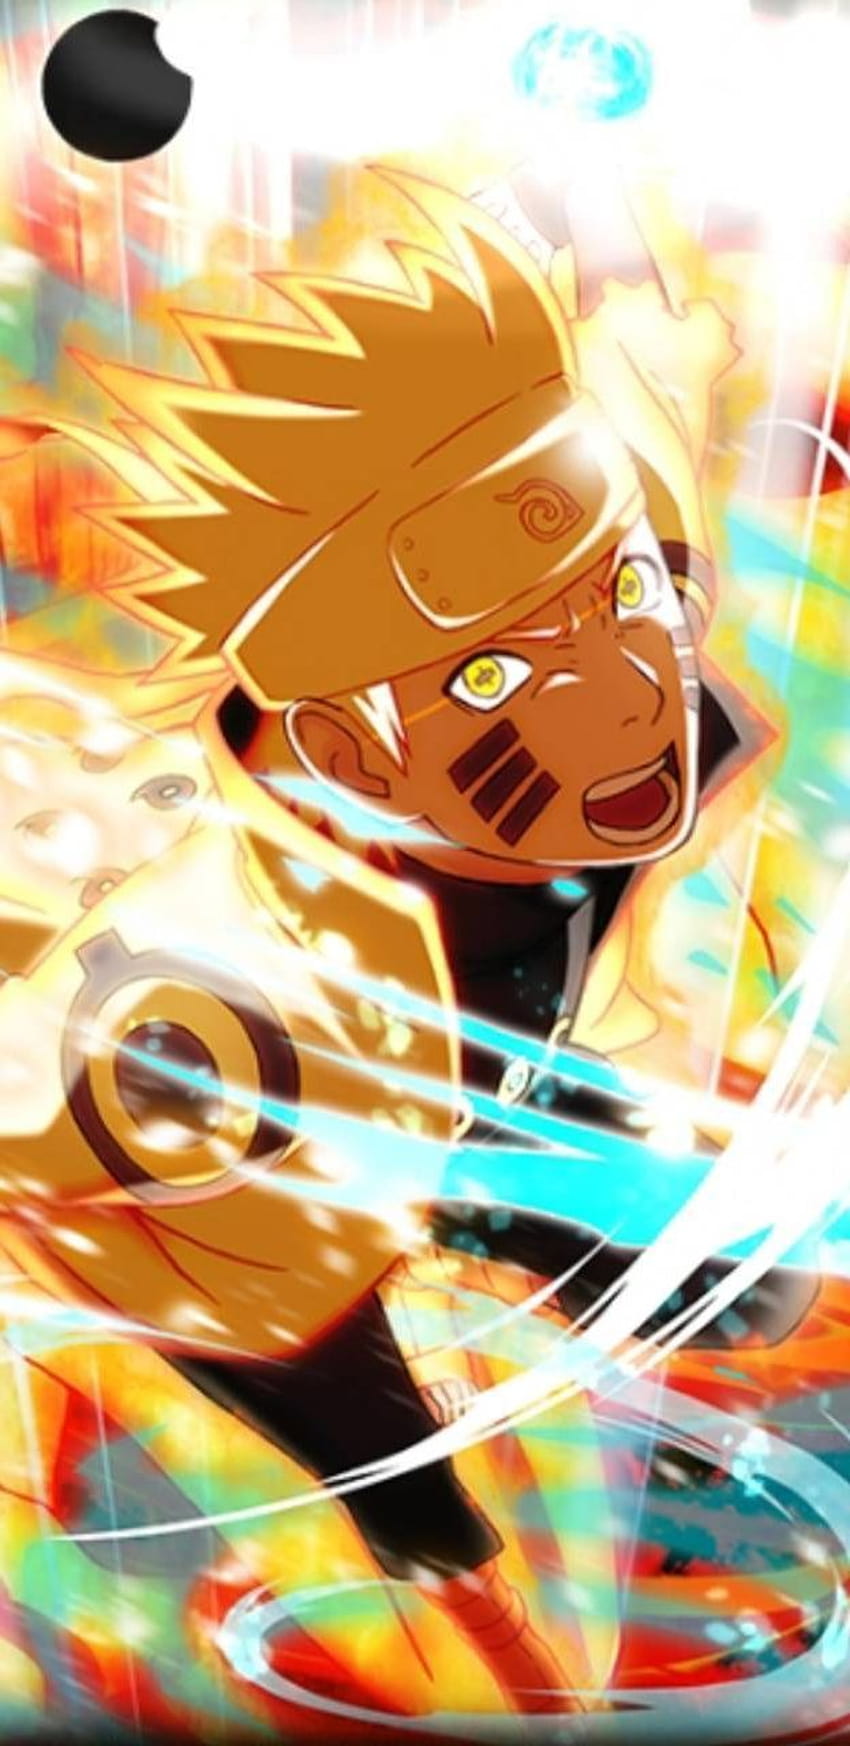 Naruto Shippuden for mobile phone, tablet, computer and other devices and . in 2021, naruto kid mobile HD phone wallpaper